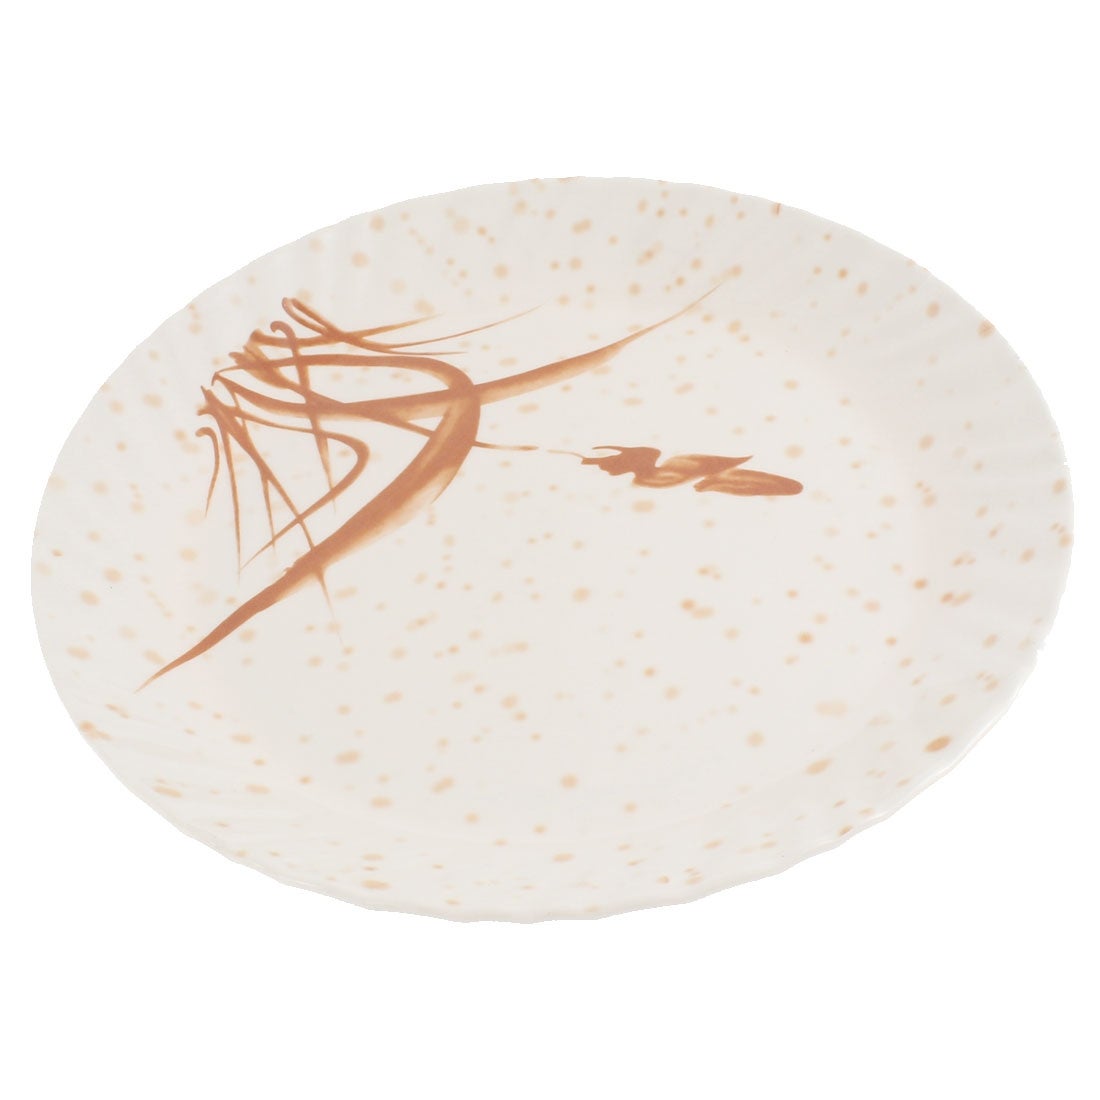 Grass Pattern Round Shaped Lunch Food Dish Plate Container 28cm Dia - Beige,Coral Pink - 11